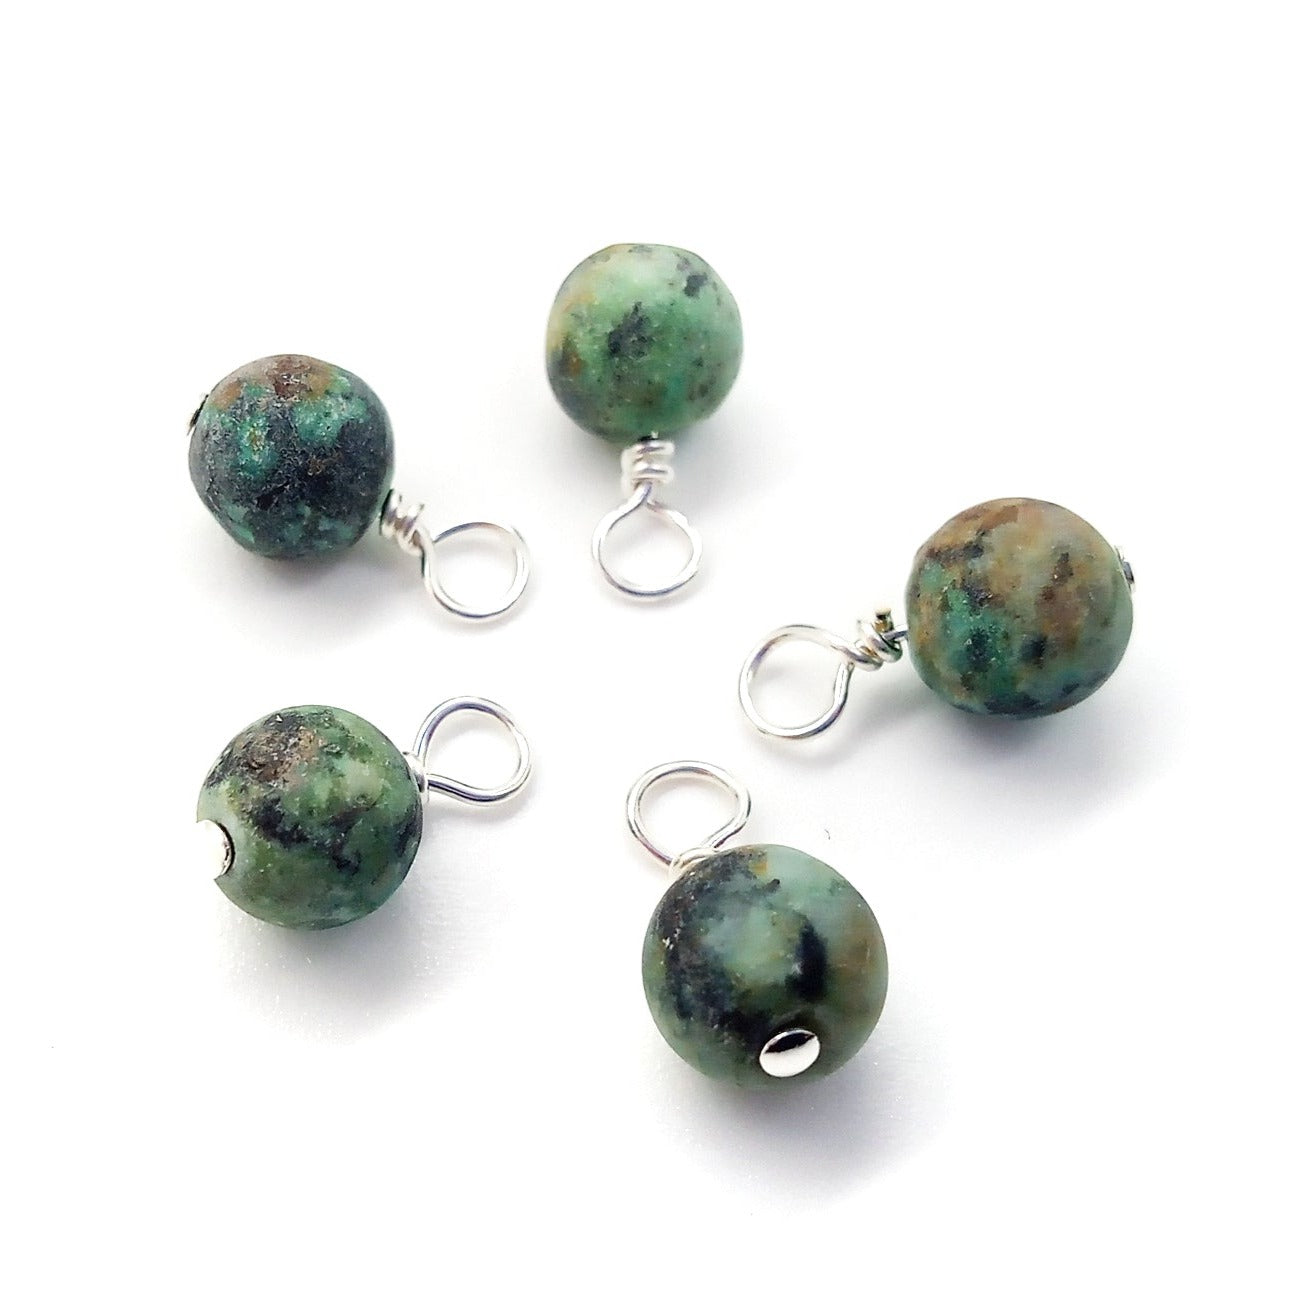 African Turquoise 6mm Bead Charms, Natural Blue Gemstone Dangles - Adorabilities Charms & Trinkets